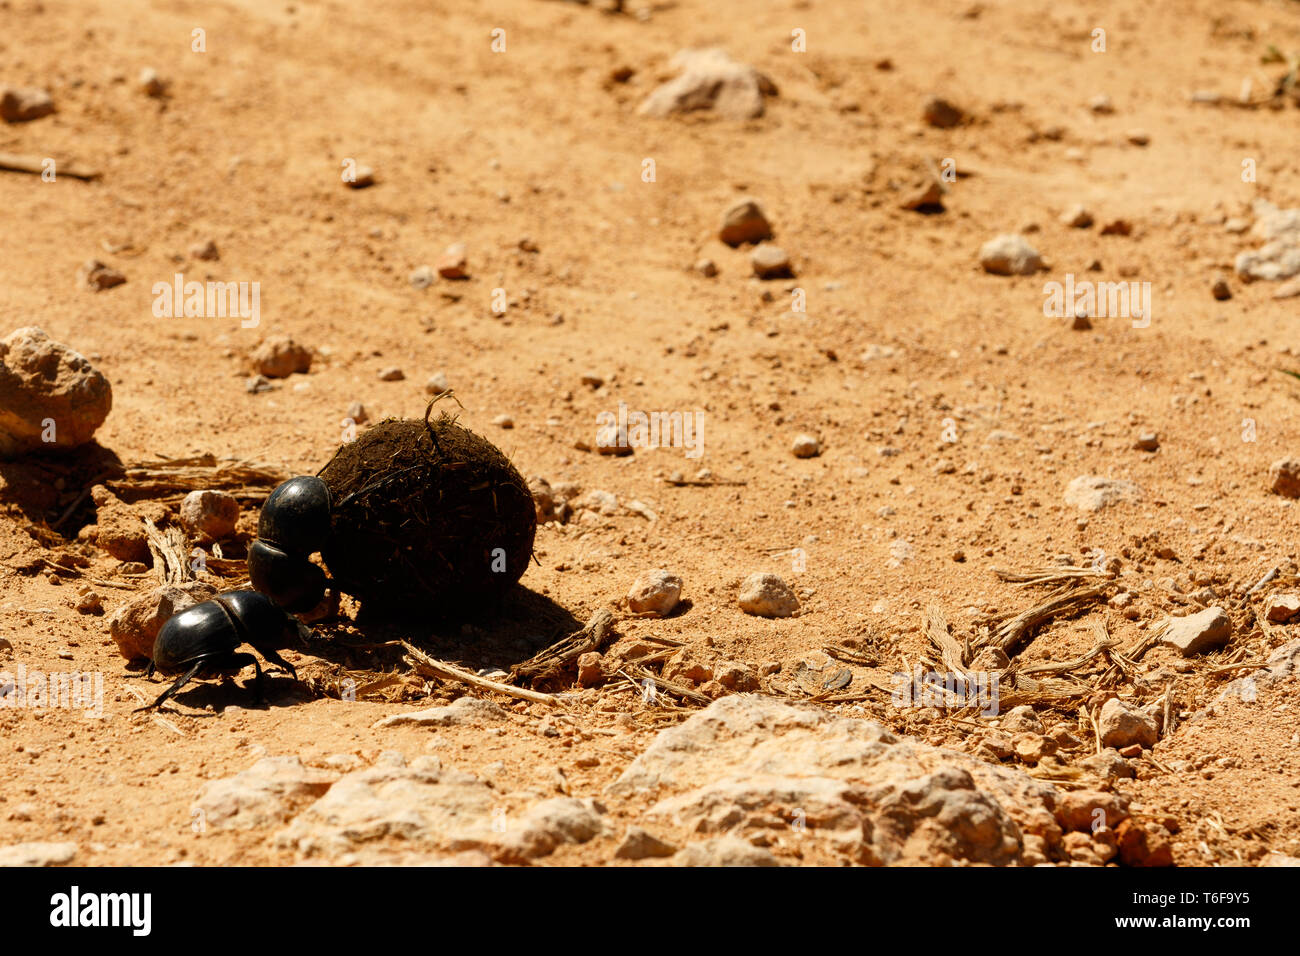 Dung beetle pushing a ball of dung across Stock Photo